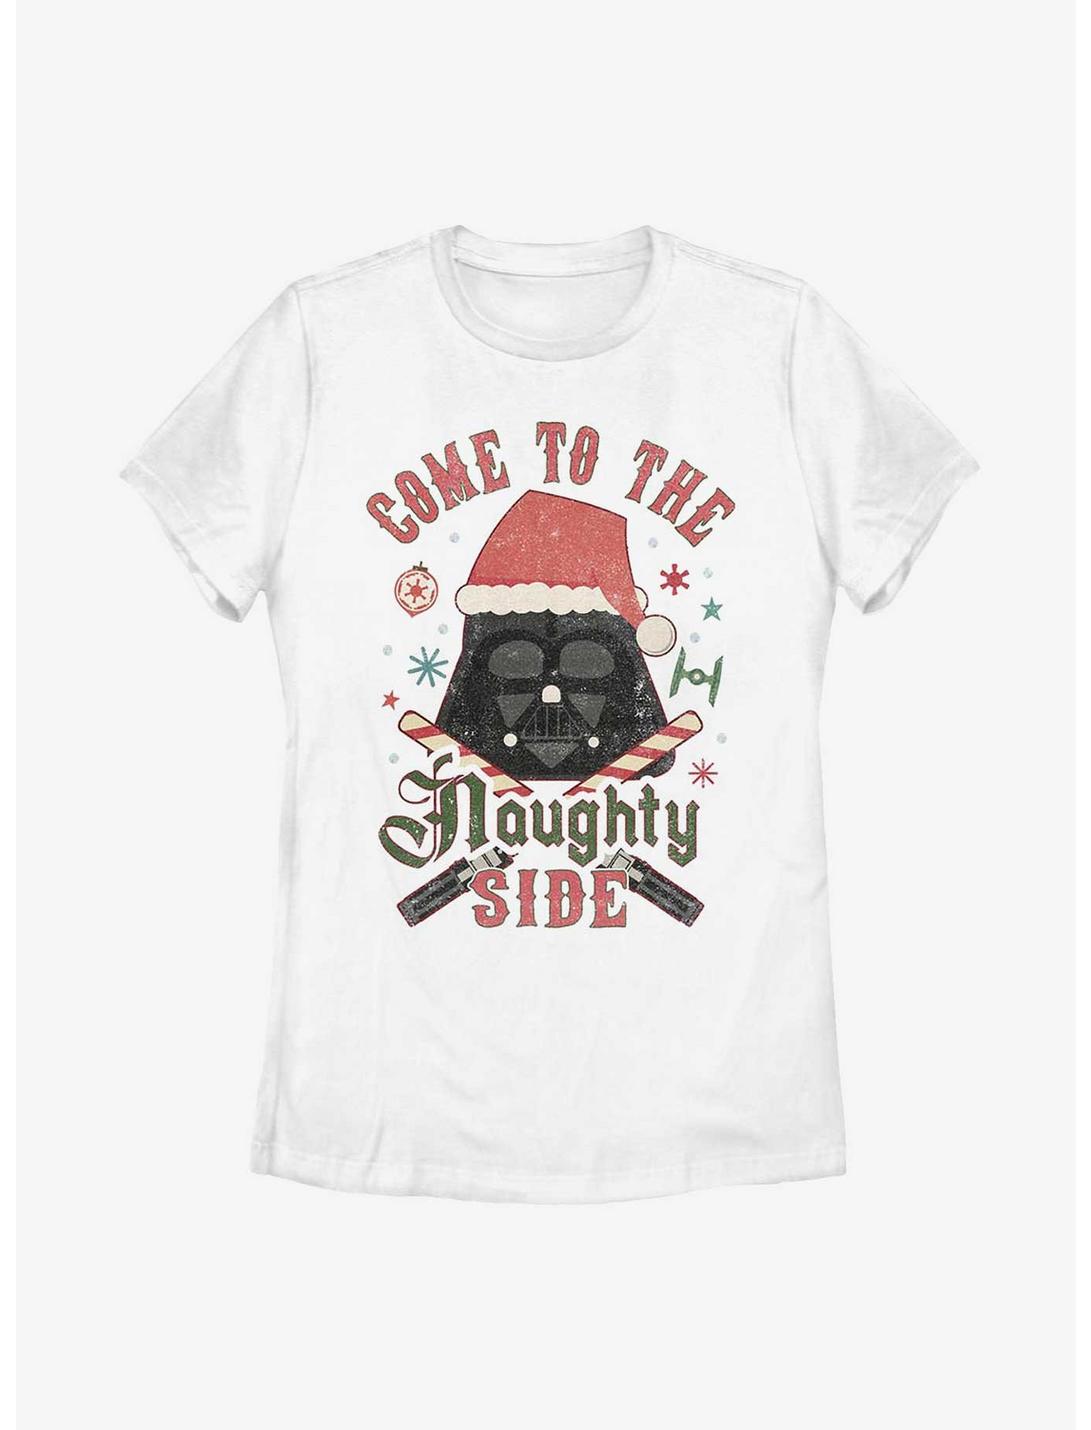 Star Wars Come To The Naughty Side Womens T-Shirt, WHITE, hi-res